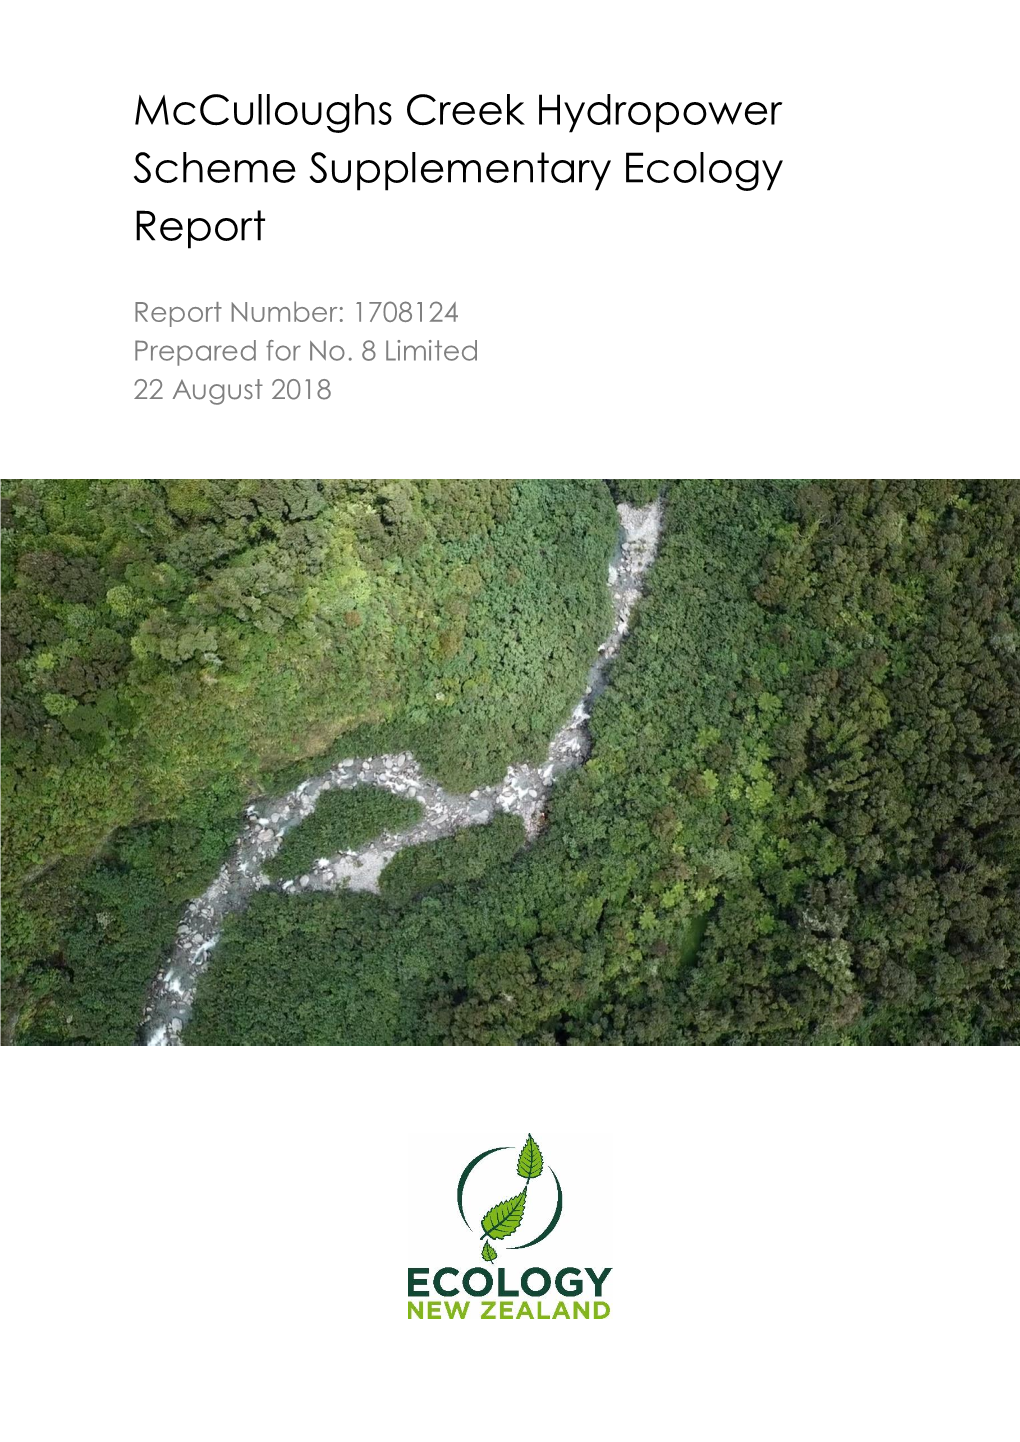 Mcculloughs Creek Hydropower Scheme Supplementary Ecology Report